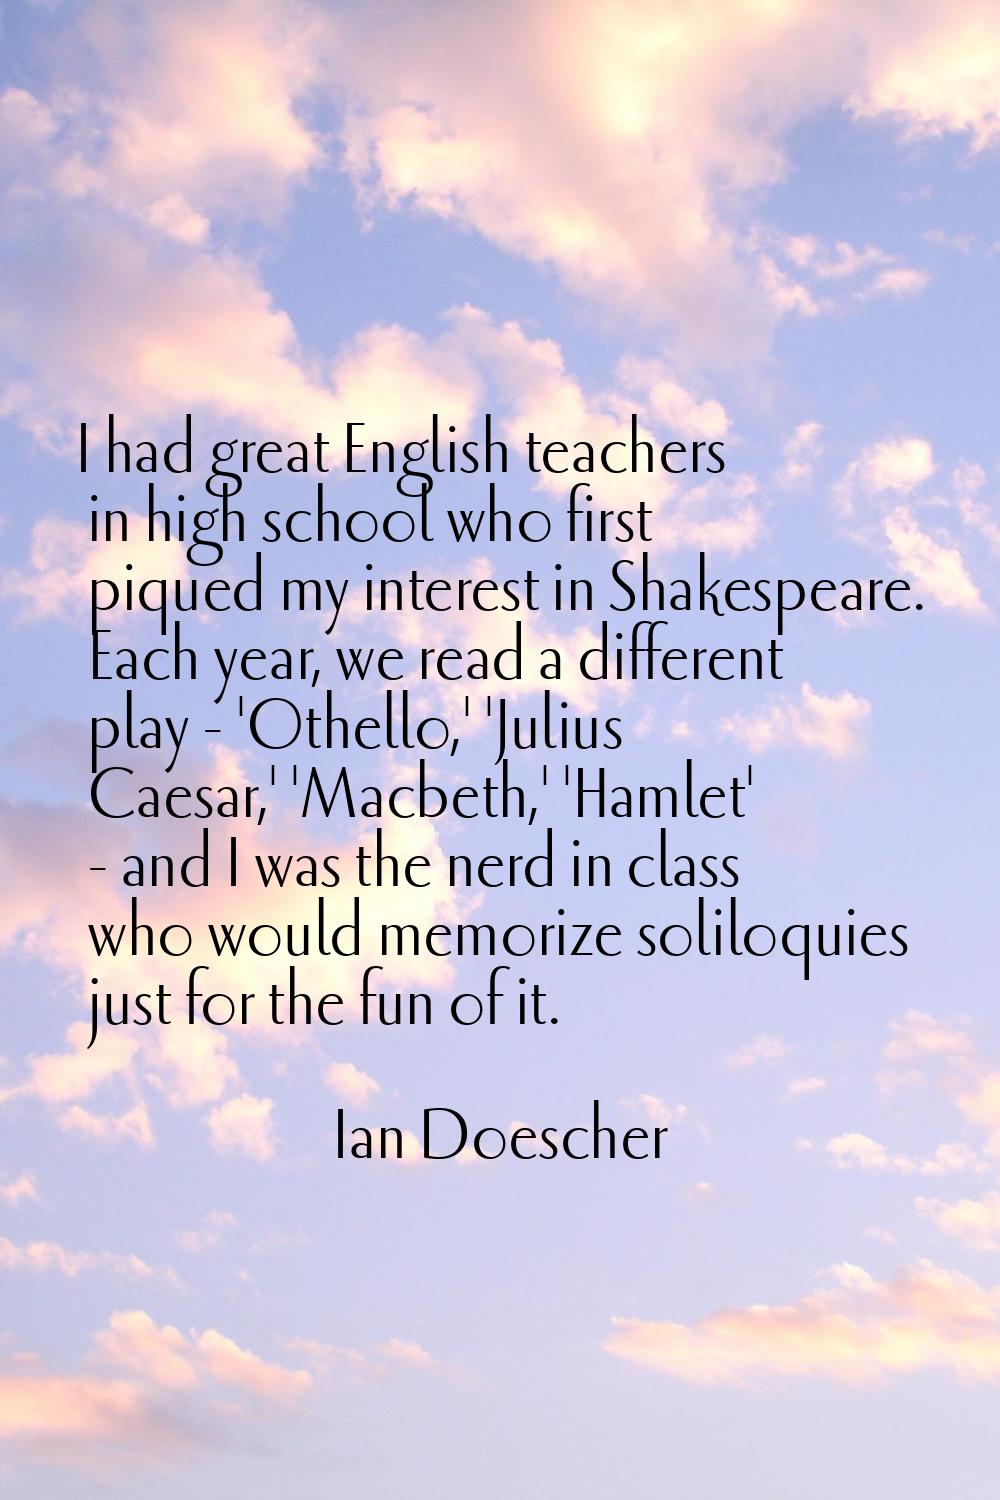 I had great English teachers in high school who first piqued my interest in Shakespeare. Each year,